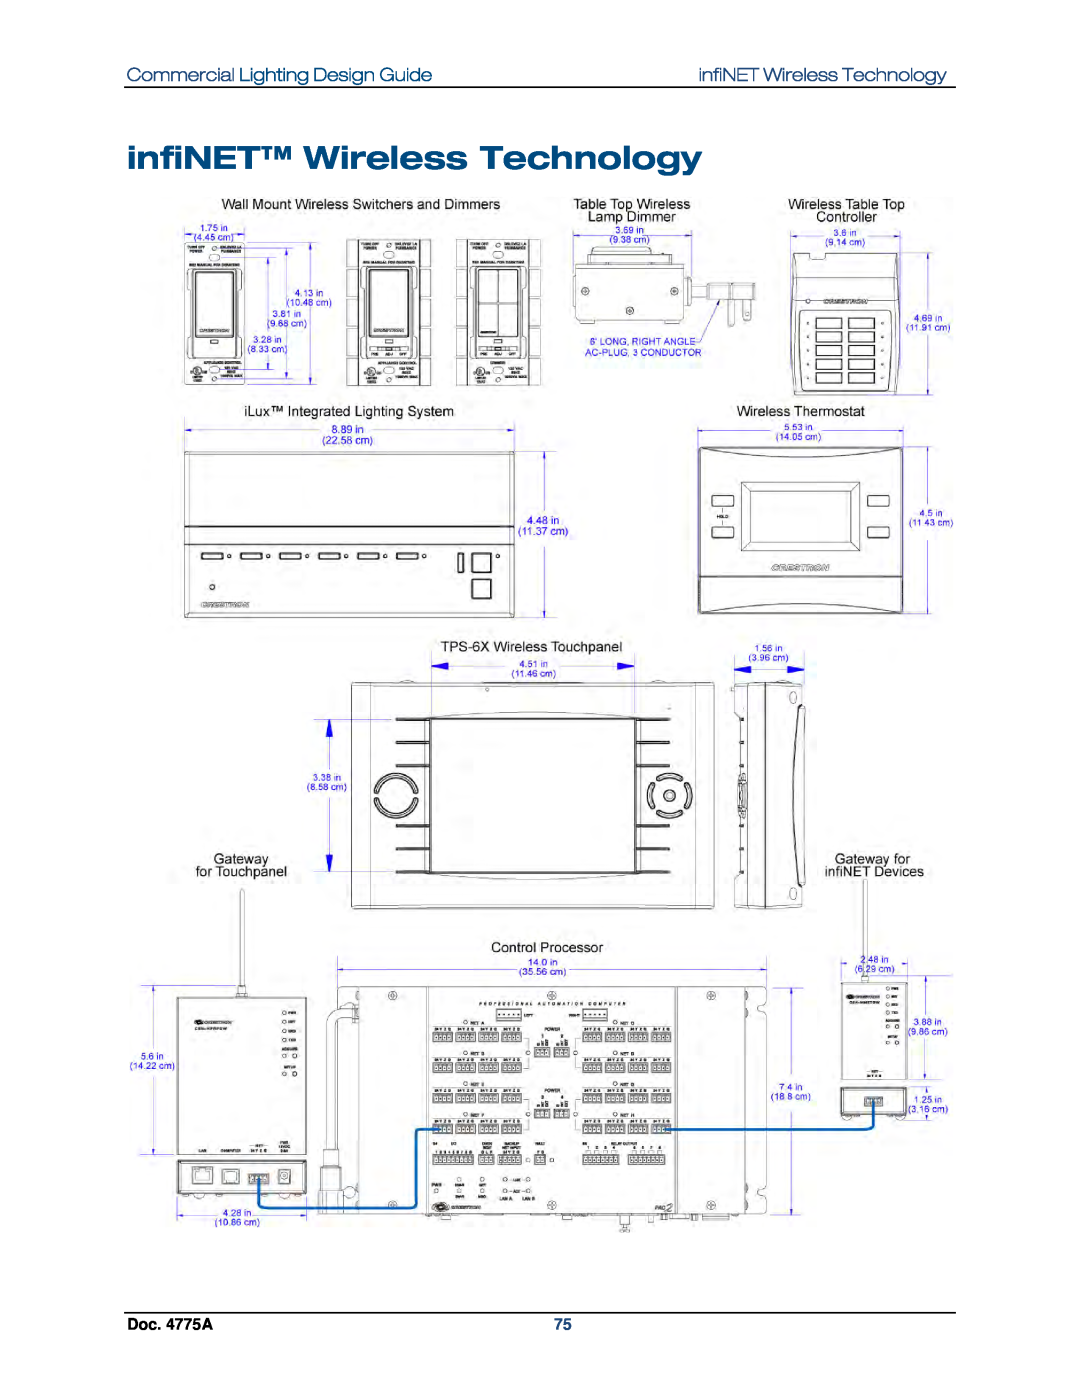 Crestron electronic IPAC-GL1, GLPS-SW-FT manual infiNET Wireless Technology, Commercial Lighting Design Guide, Doc. 4775A 